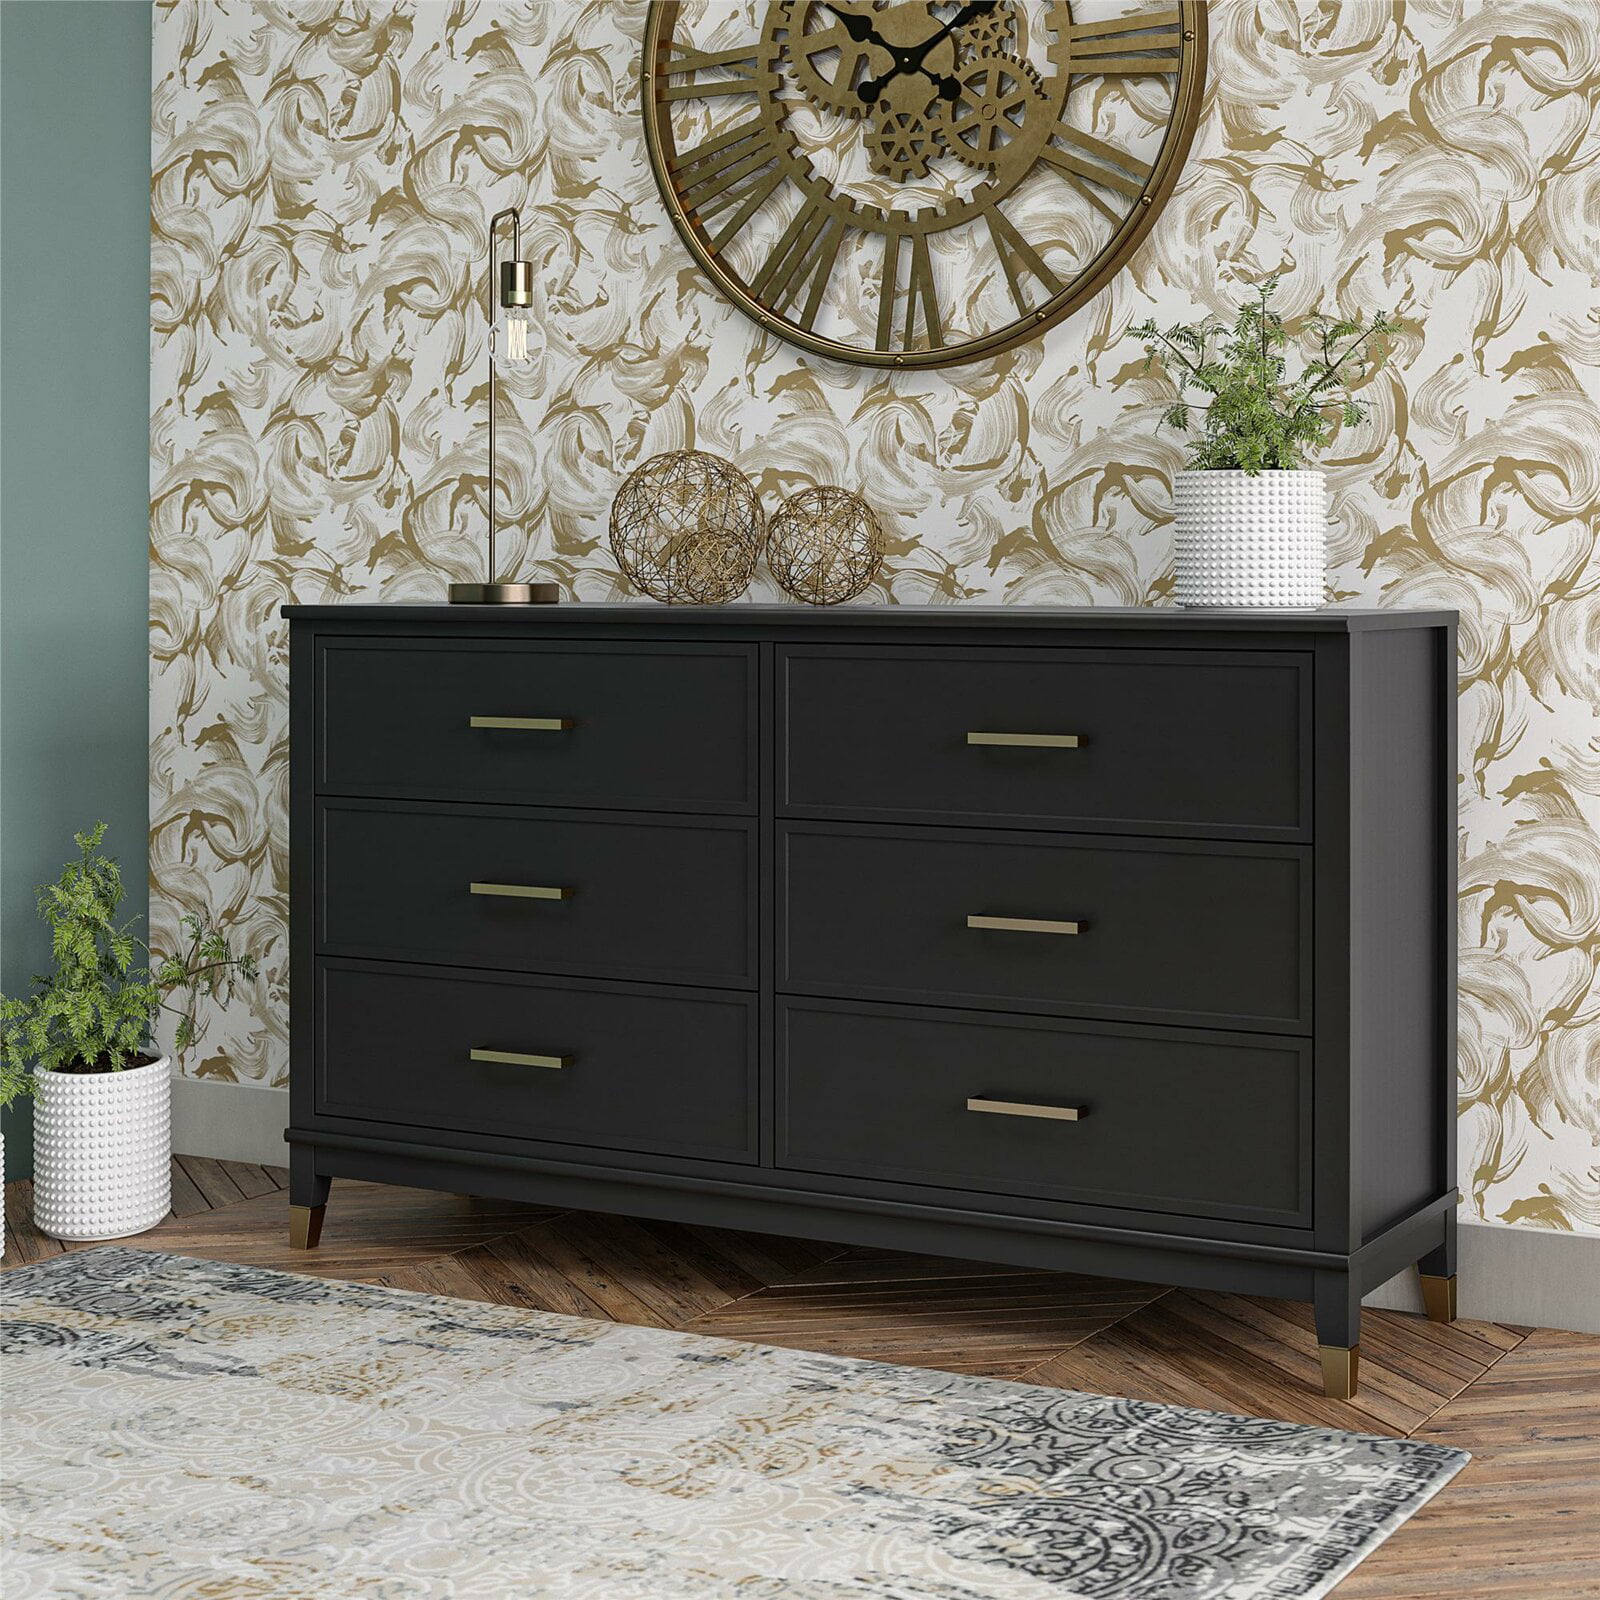 Westerleigh 6 Drawer Double Dresser, Main Drawers Weight Capacity 50